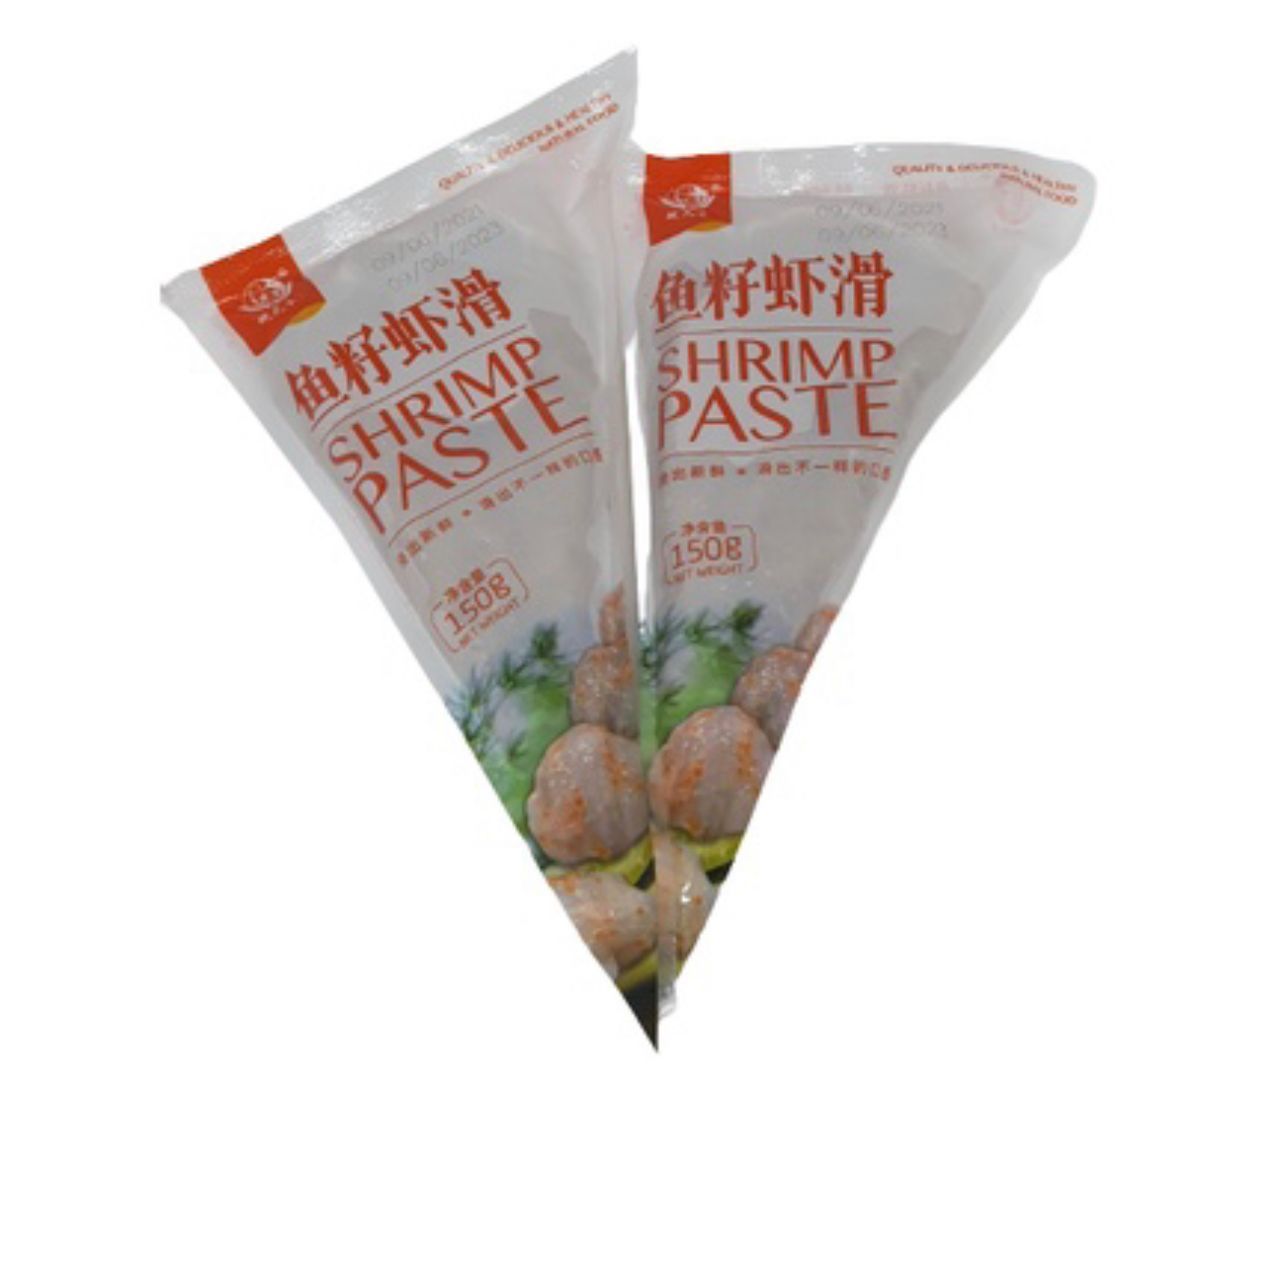 Fish Roe Prawn Paste 鱼籽虾滑 150g (WITH ROE!)